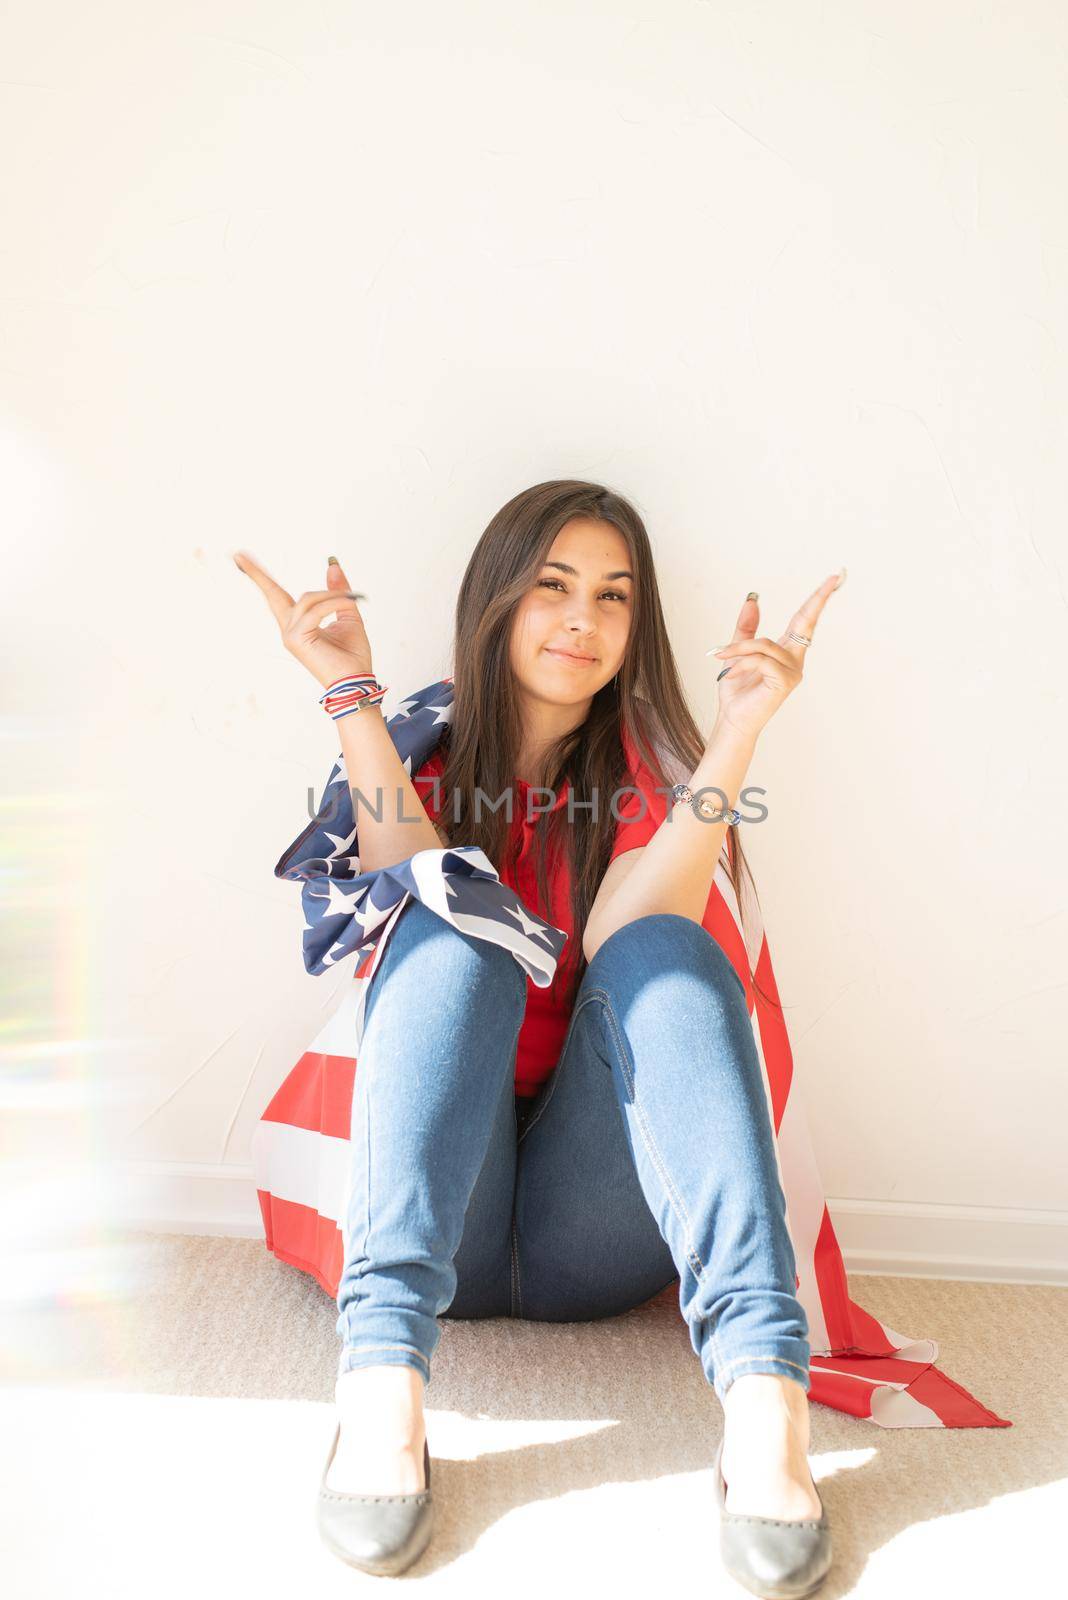 Independence day of the USA. Happy July 4th. beautiful young woman with american flag, prism rainbow reflection on the foreground. Copy space